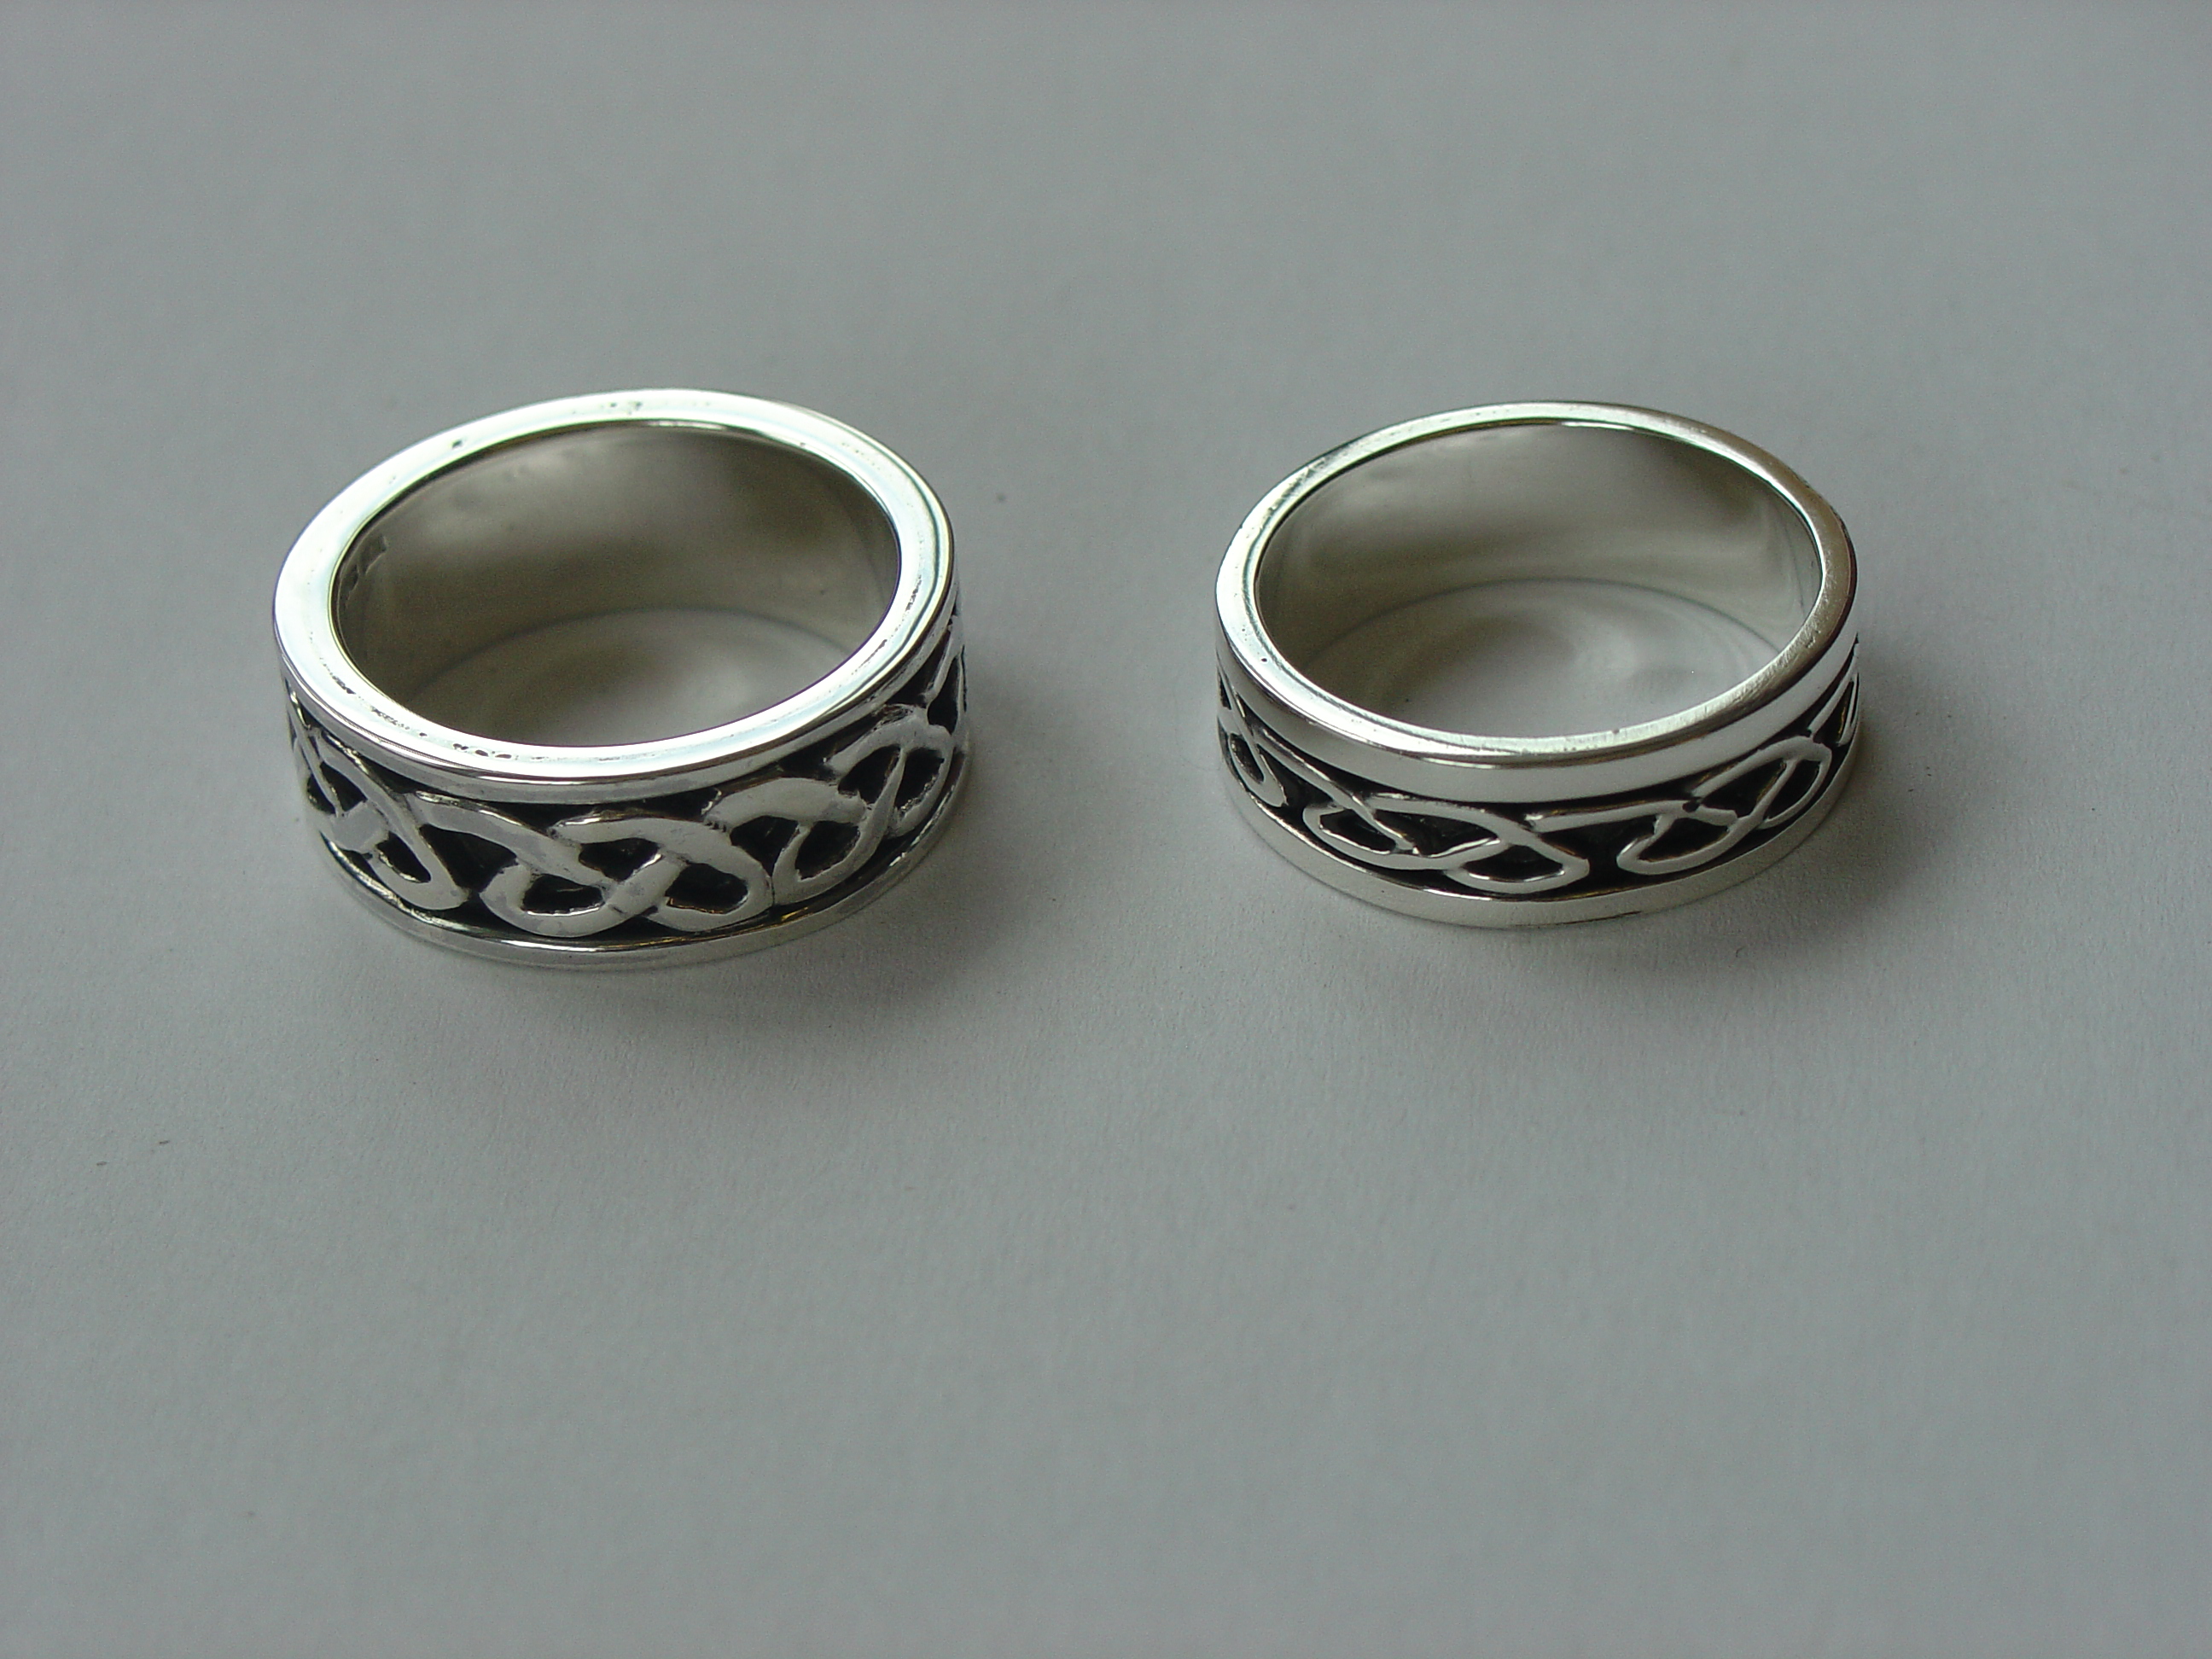 Silver bands with cut out knot work